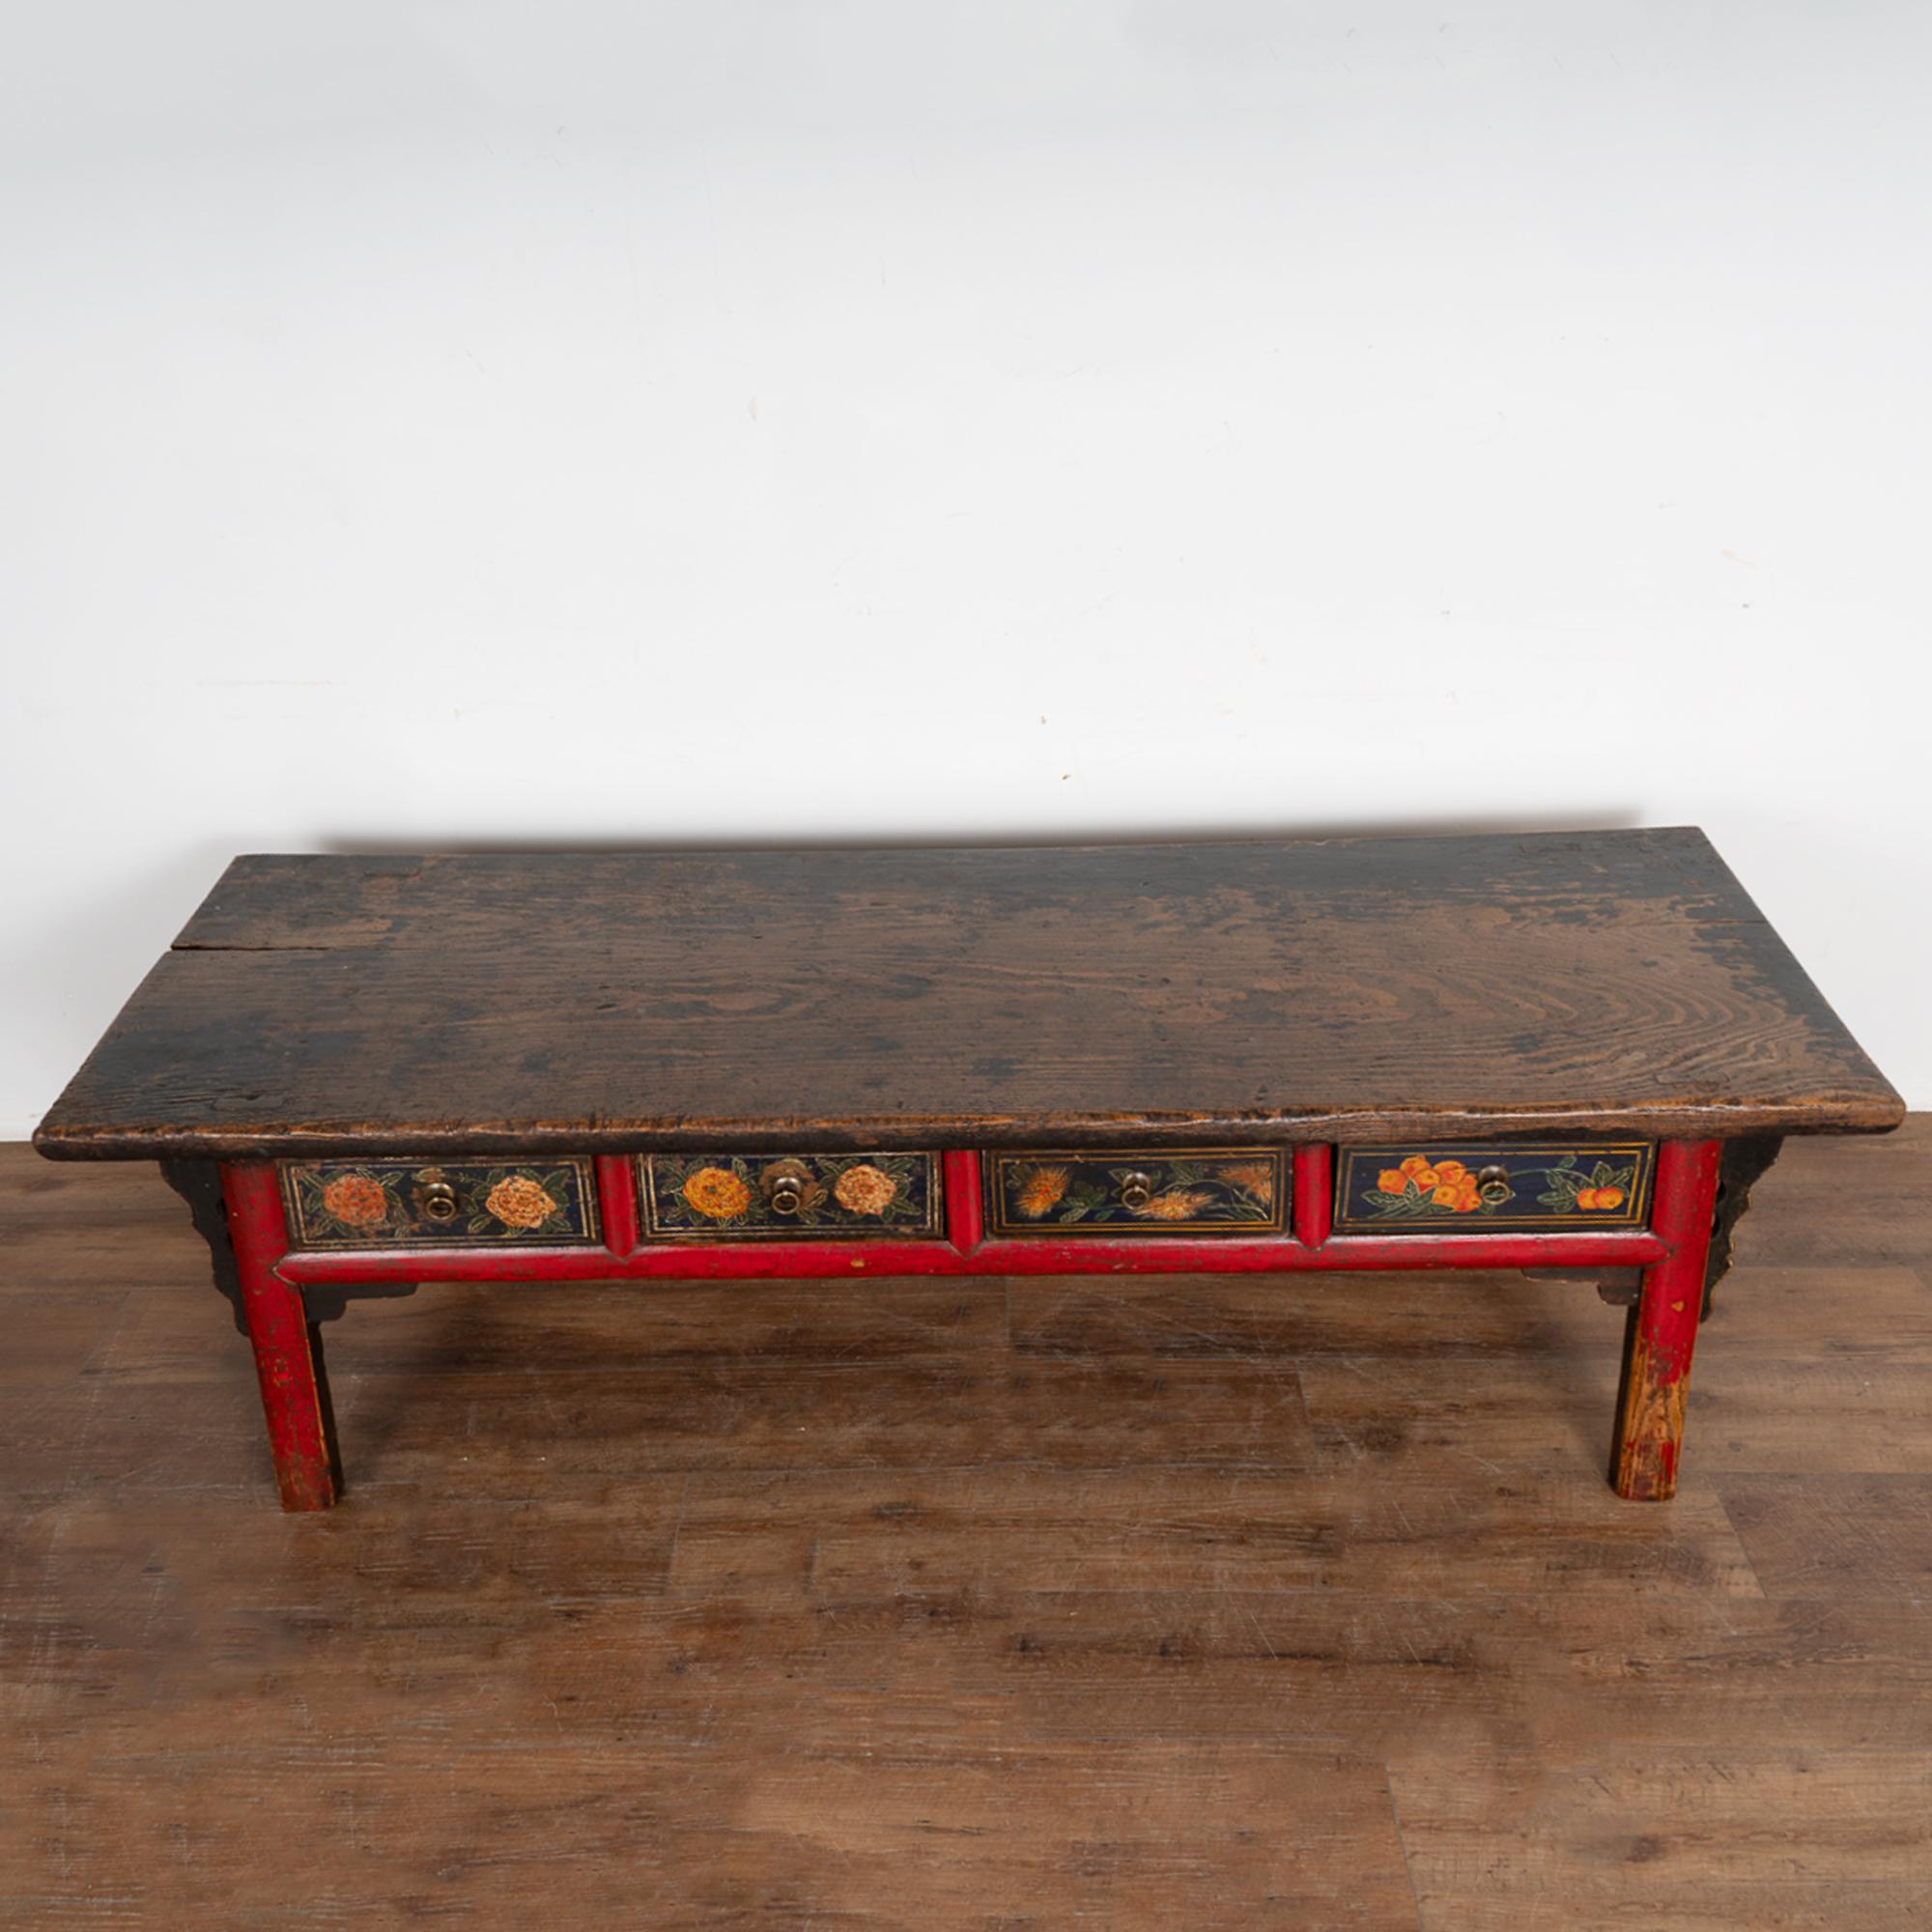 Chinese Export Original Hand Painted Coffee Table, China, circa 1820